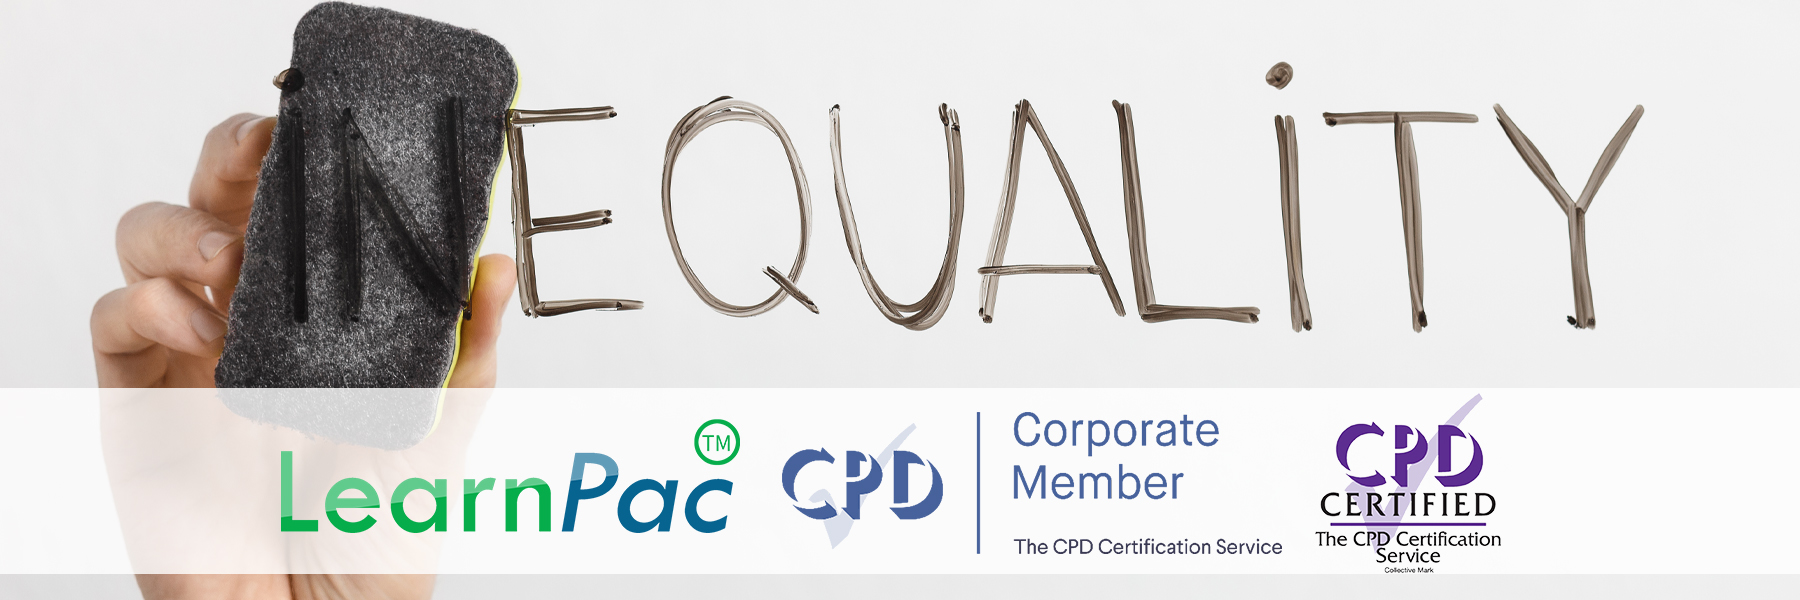 Equality and Diversity - E-Learning Courses - LearnPac Systems UK -